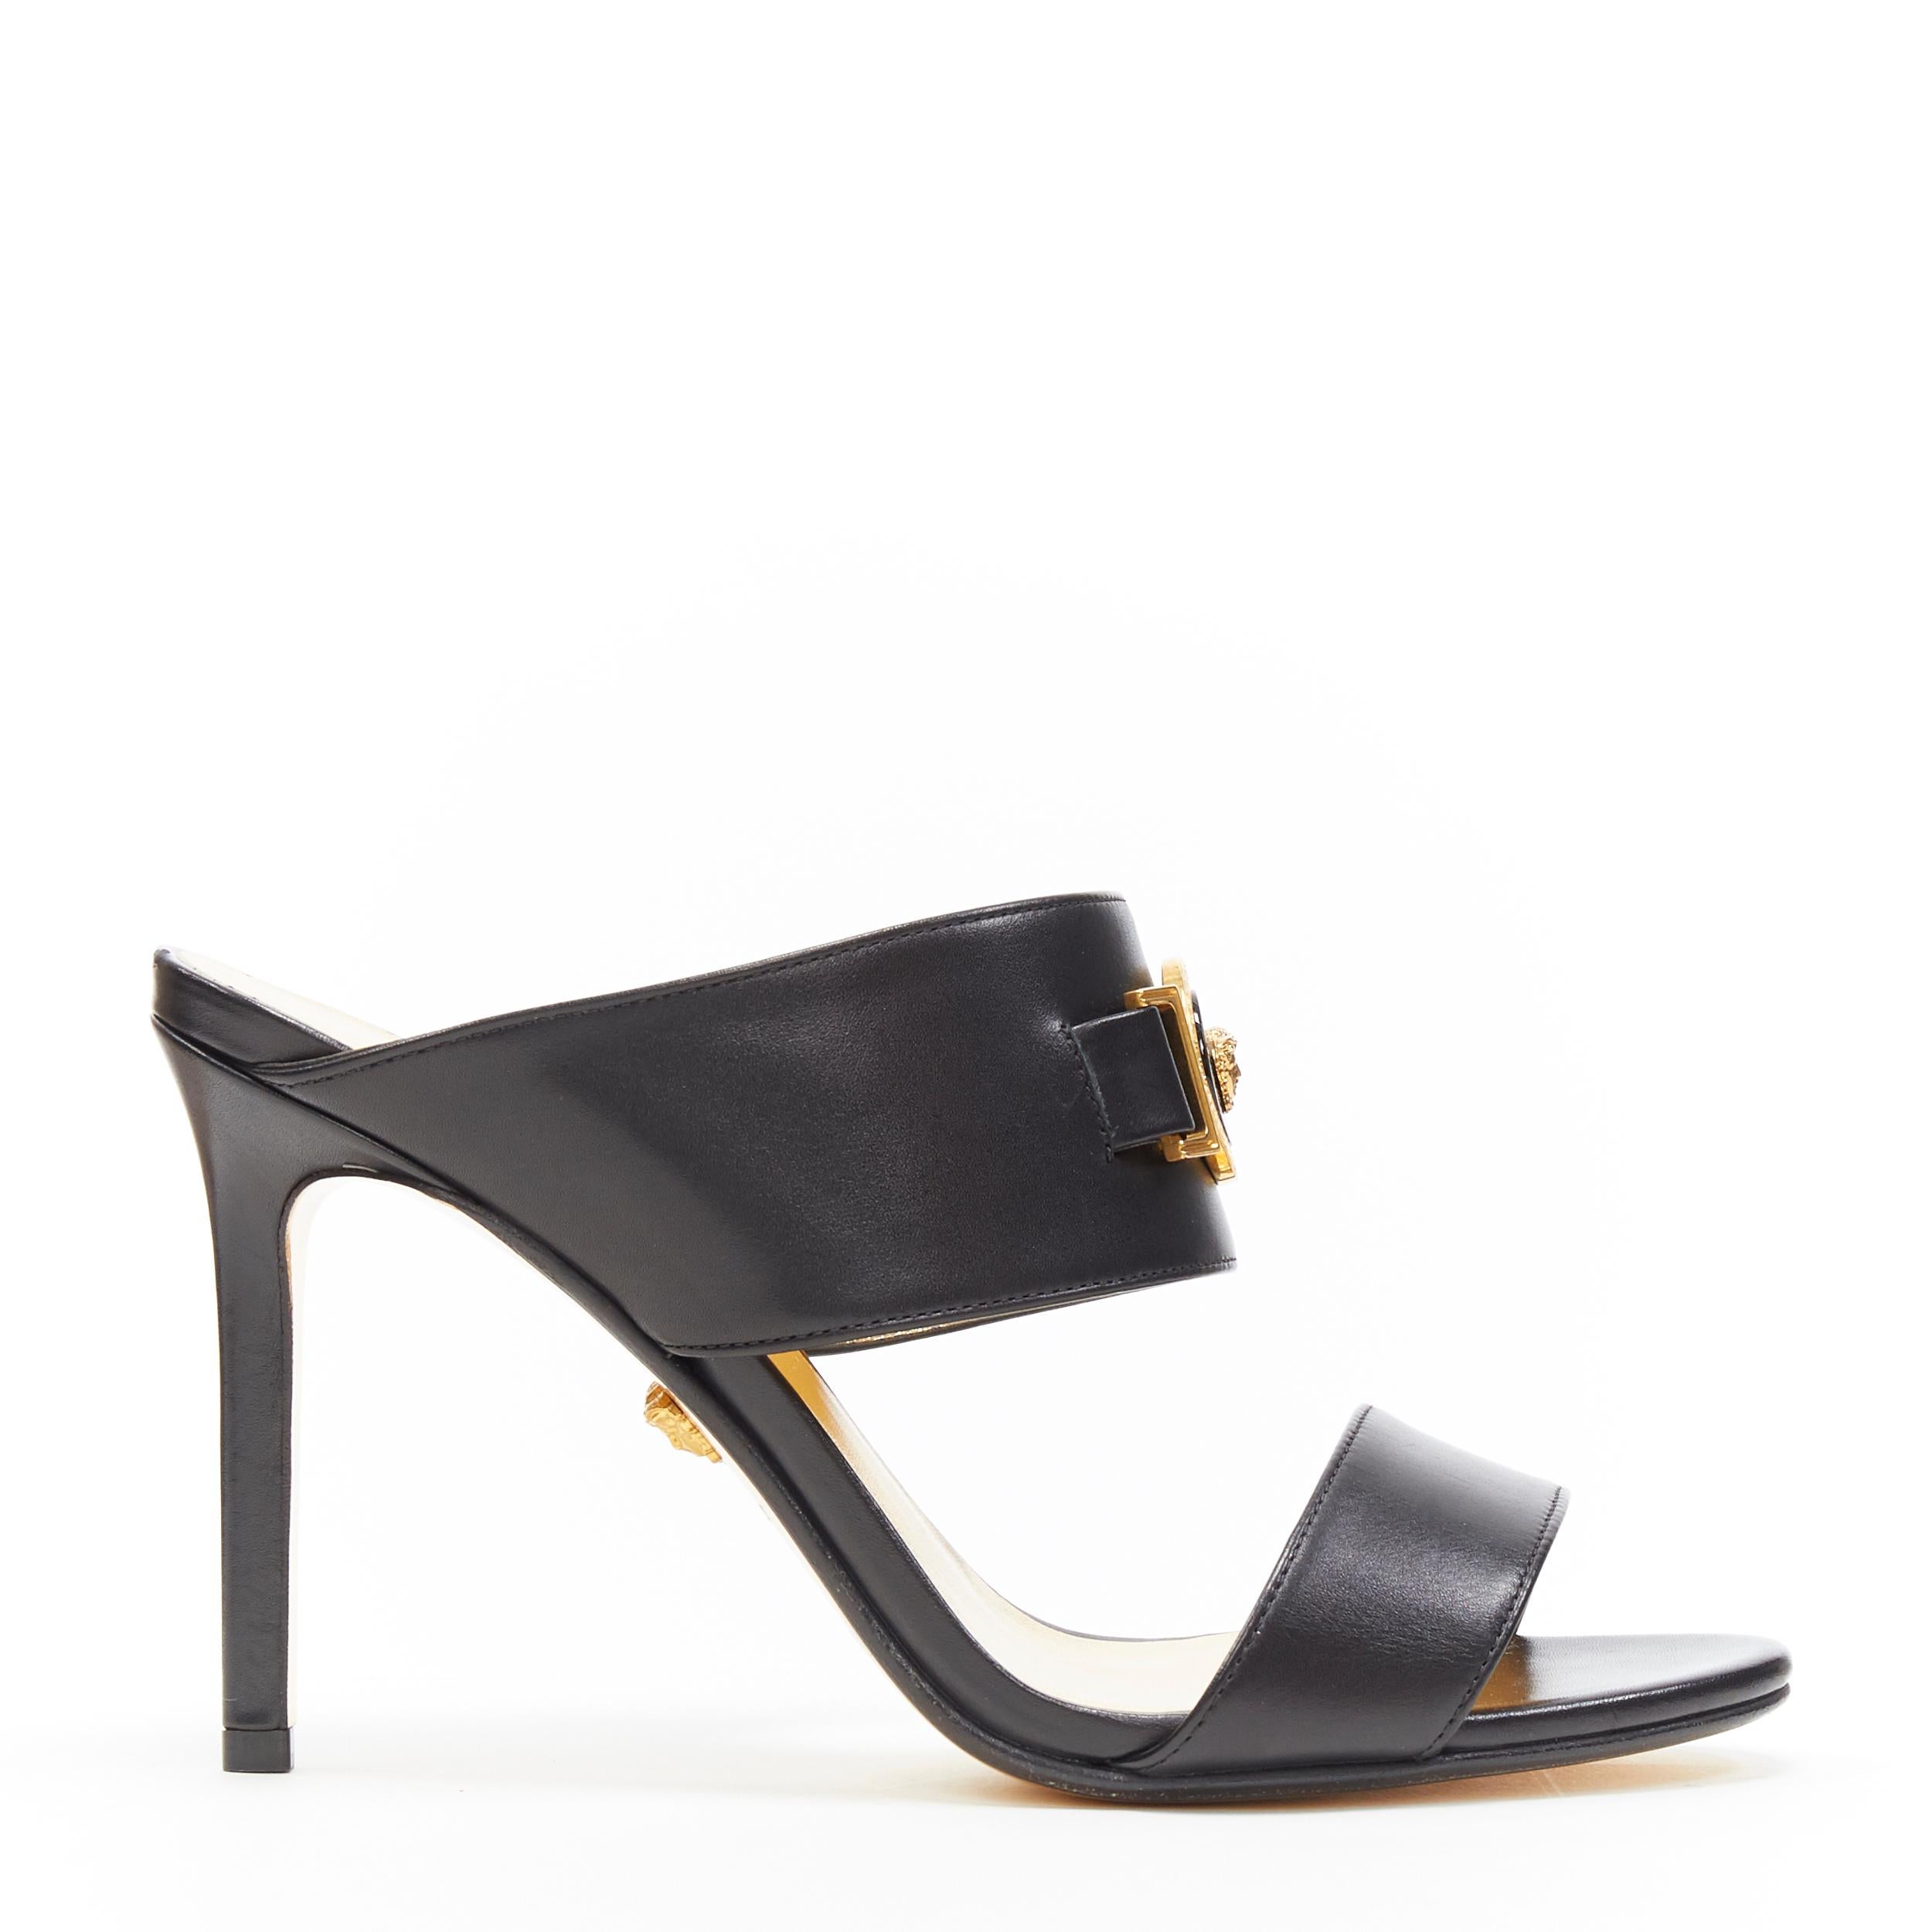 new VERSACE Tribute Medusa Medallion coin dual strap mule high heel sandals EU37
Brand: Versace
Designer: Donatella Versace
Collection: 2019
Model Name / Style: Mule
Material: Leather
Color: Black
Pattern: Solid
Closure: Slip on
Lining material: